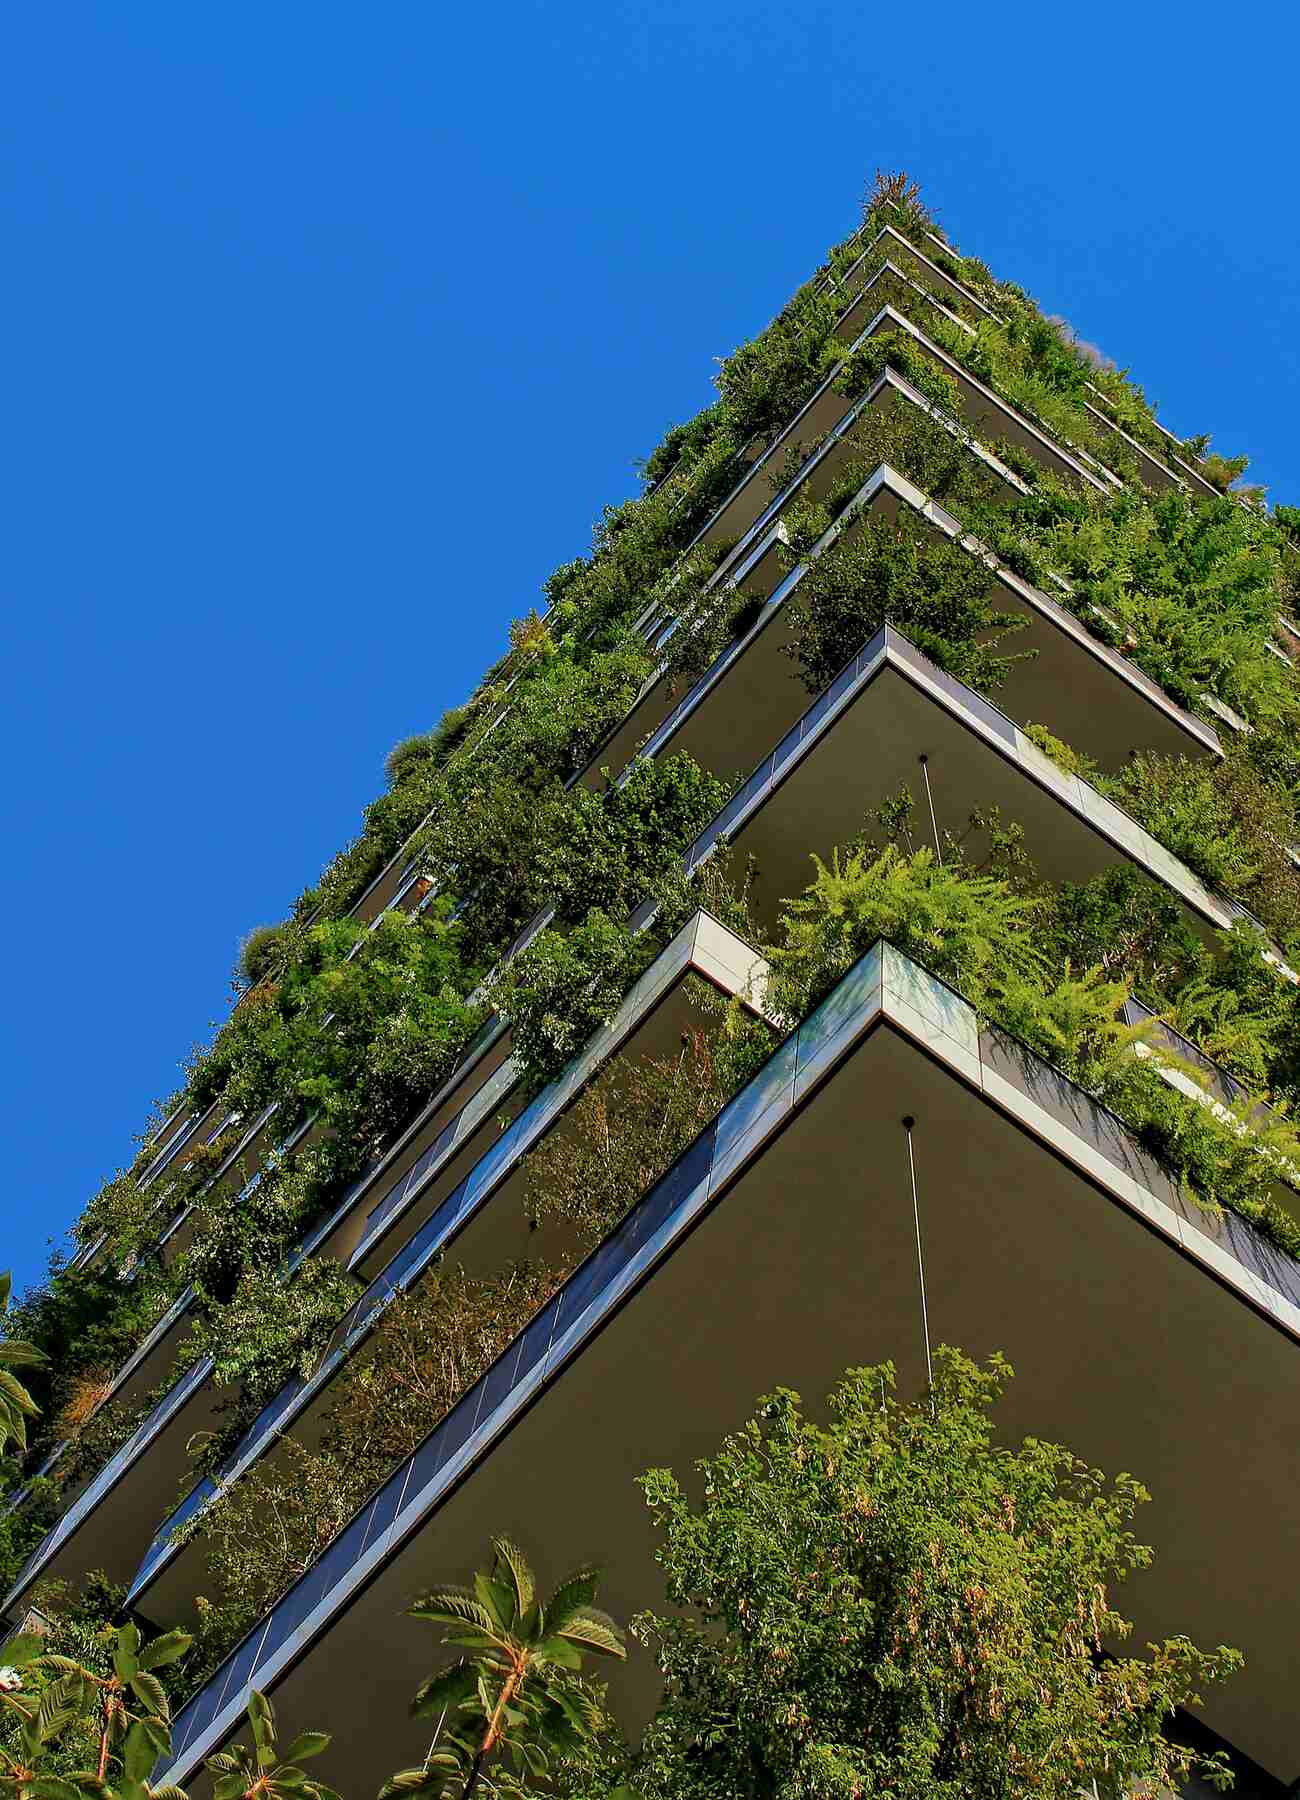 A building with a lush green roof covered in thriving plants